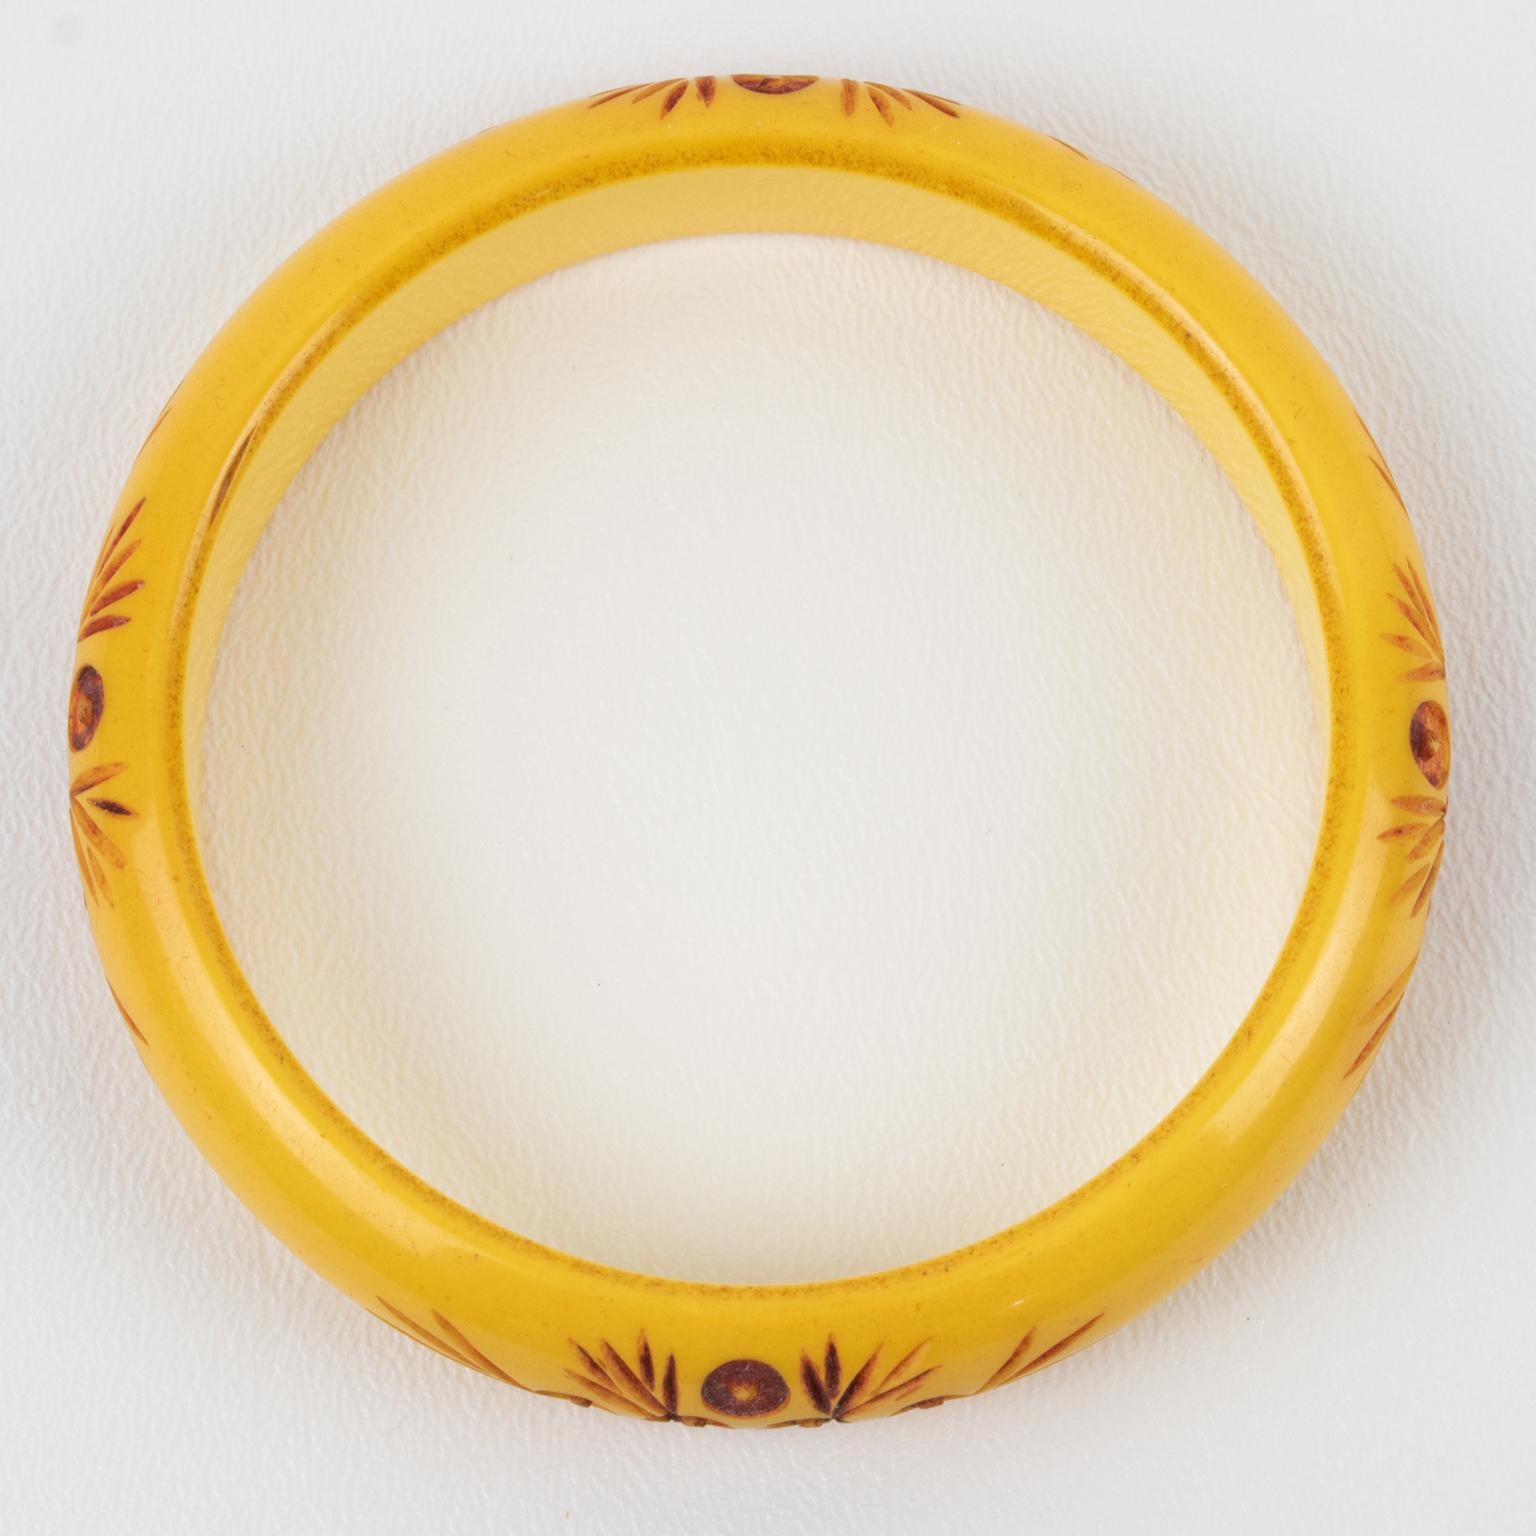 Bakelite Bracelet Bangle Yellow Creamed Corn with Carved Red Flowers In Good Condition For Sale In Atlanta, GA